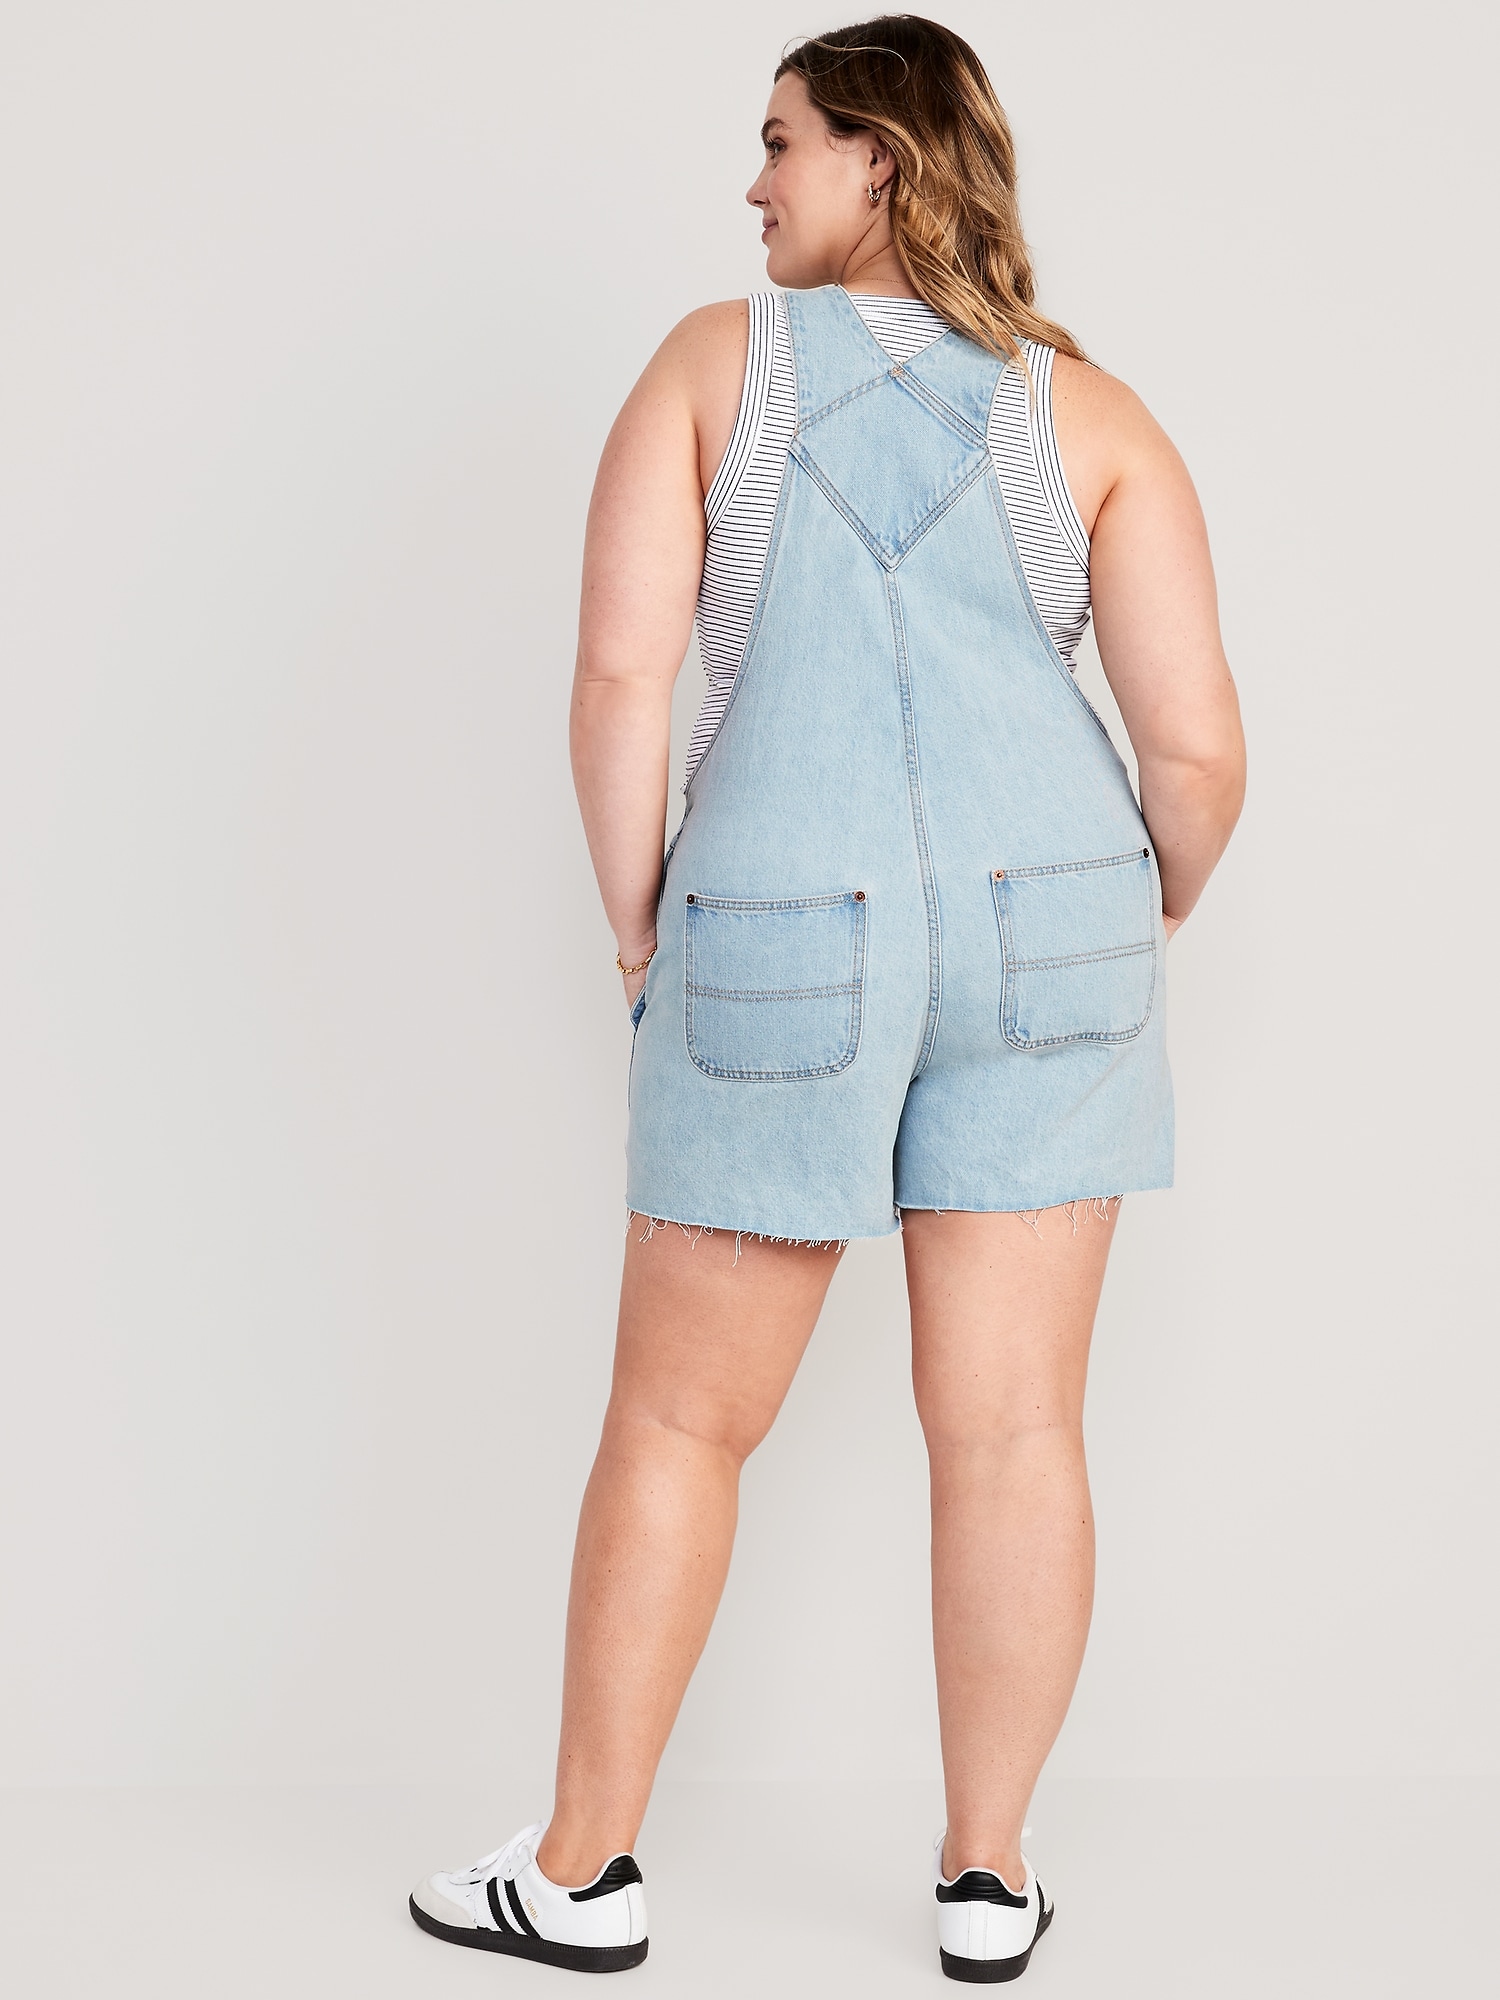 WOMENS PLUS SIZE SHORTS & OVERALLS